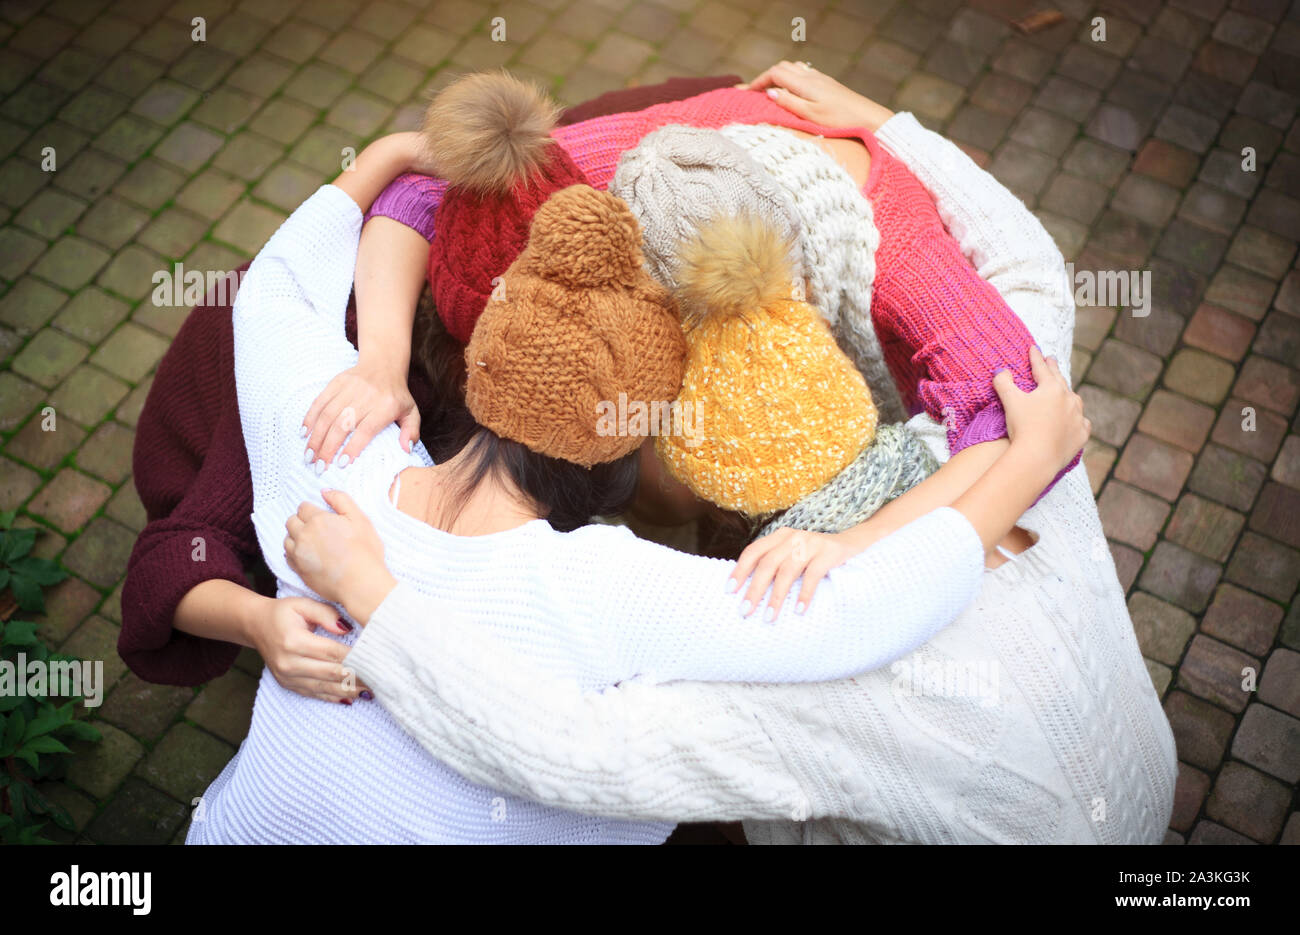 Girls in warm knitted clothes and hats hug, top view. Autumn day, a group of friends. Positive emotions. Stock Photo